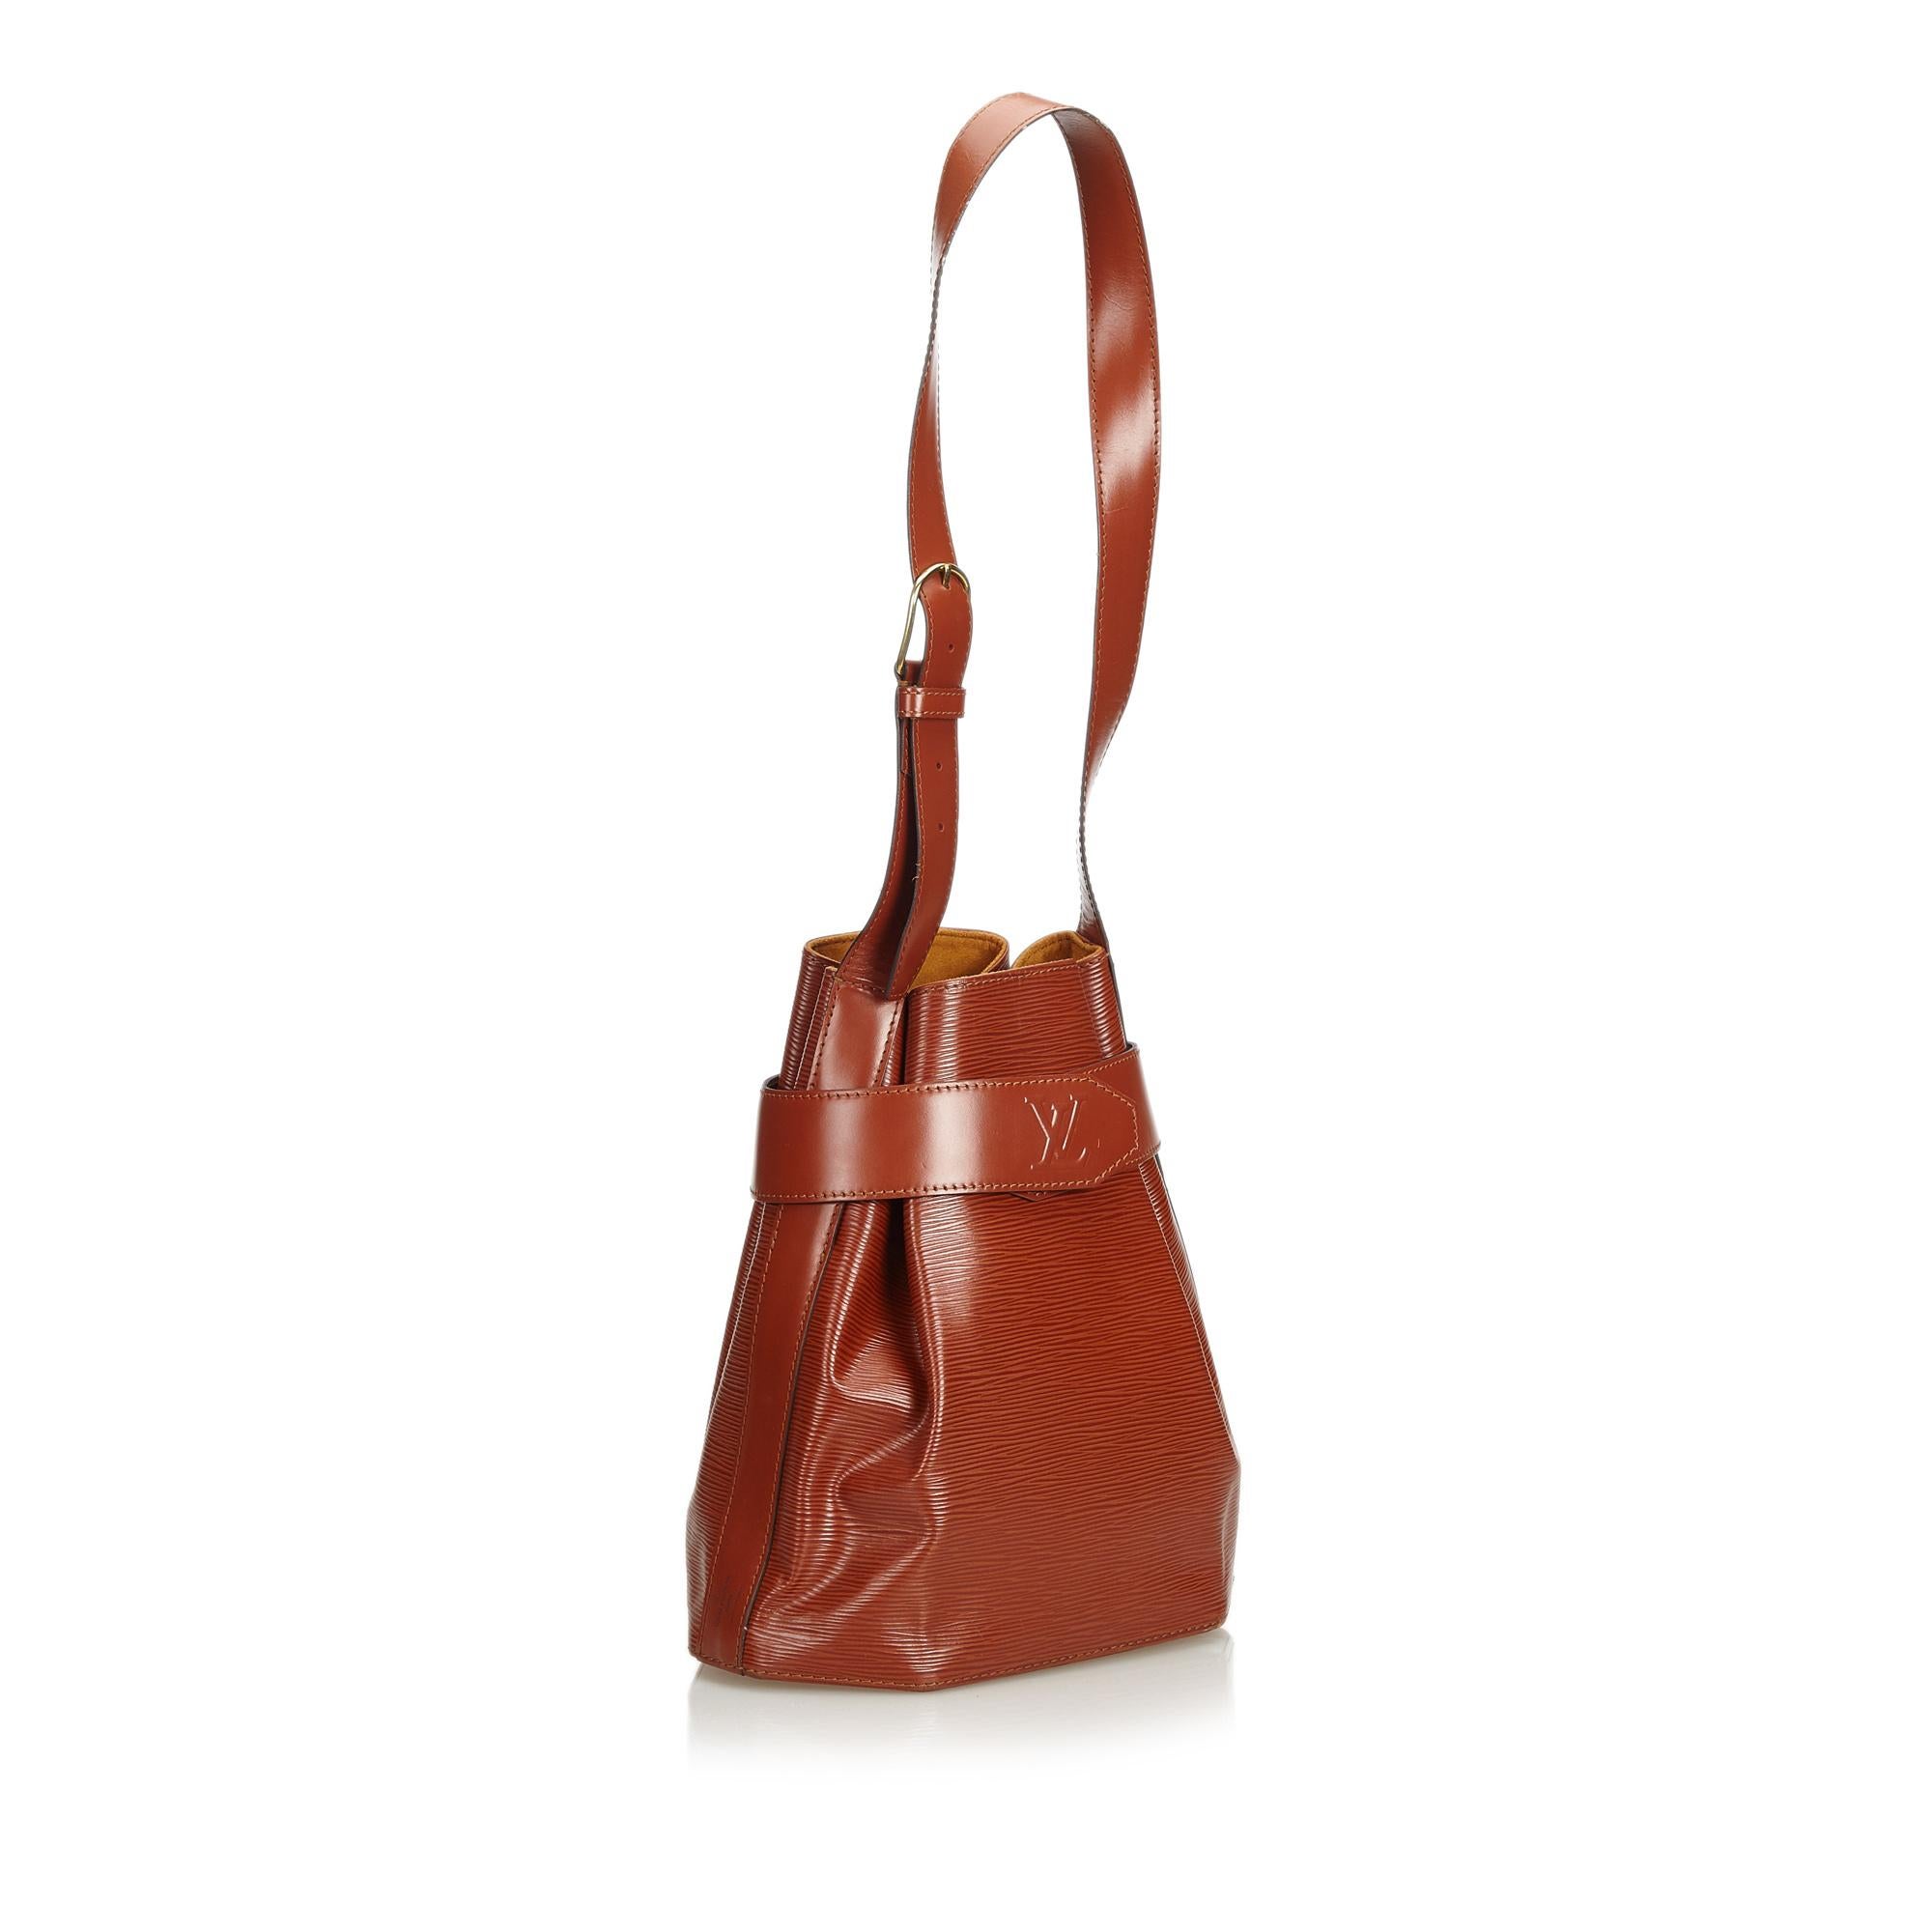 The Sac dEpaule features Epi leather body, an open top with a belt closure secured by a magnetic clasp, an adjustable shoulder strap, and Alcantara lining. It carries as B+ condition rating.

Inclusions: 
This item does not come with